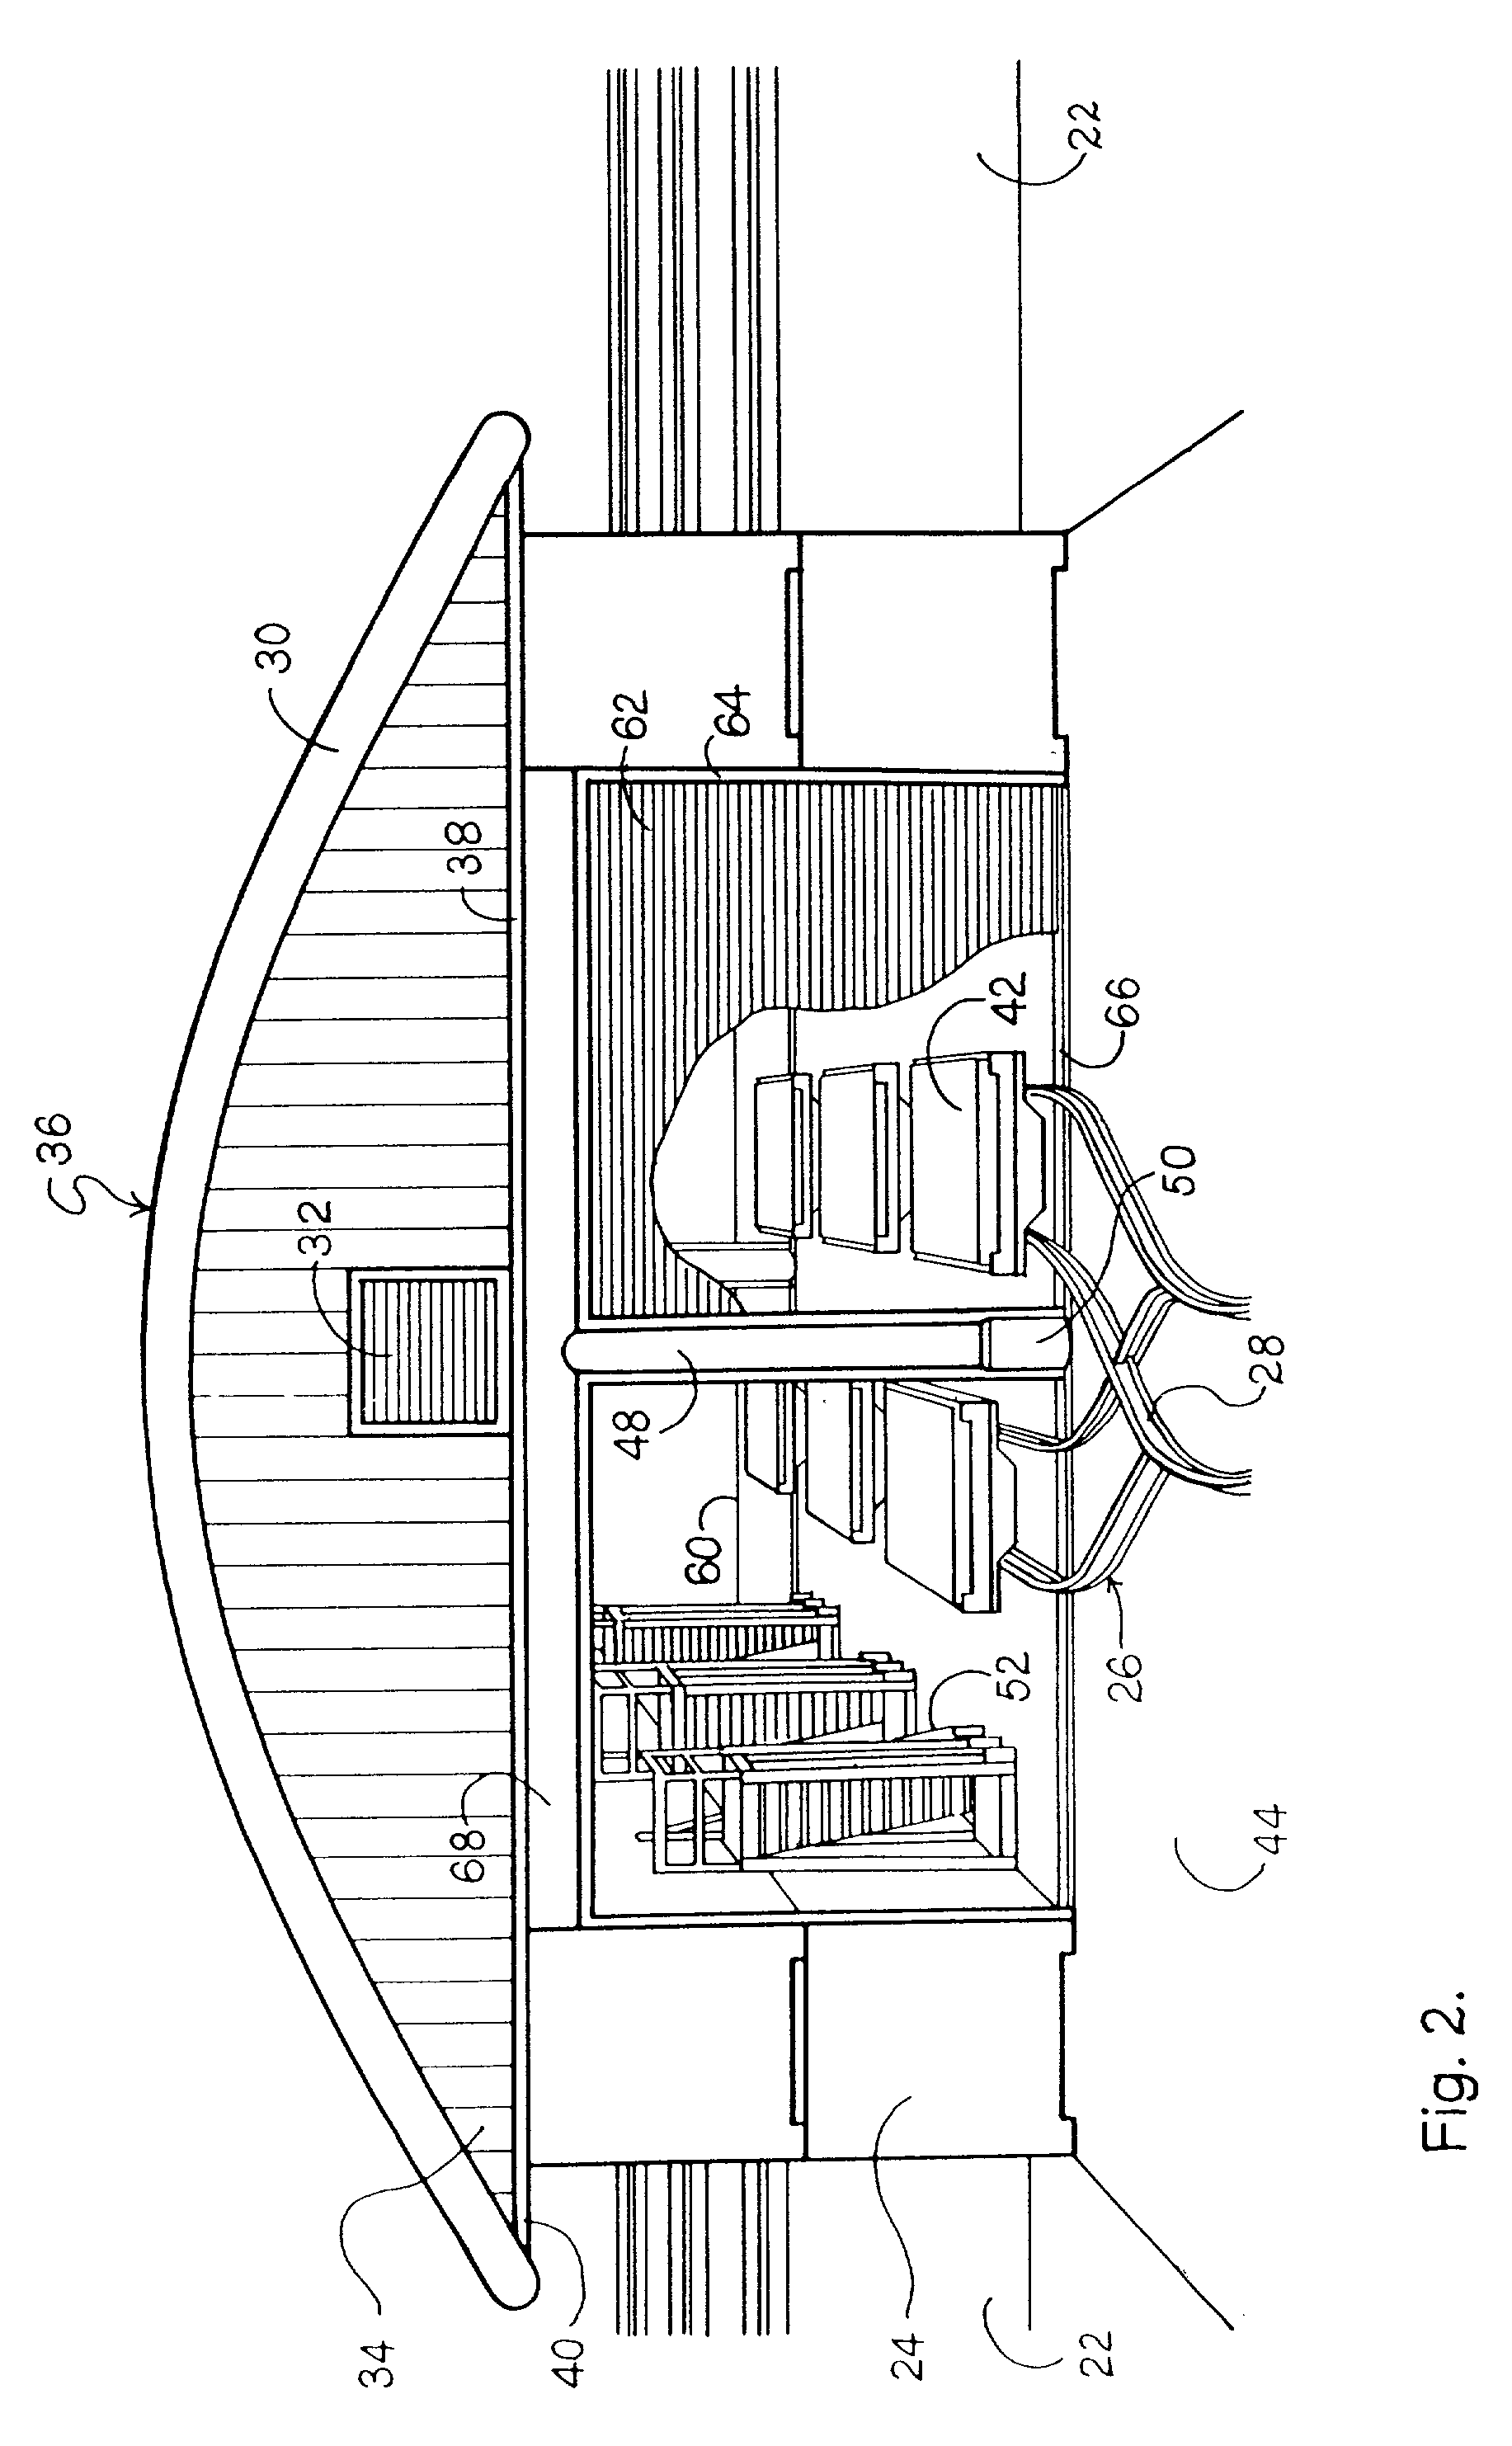 Portable modular factory structure and method of constructing same